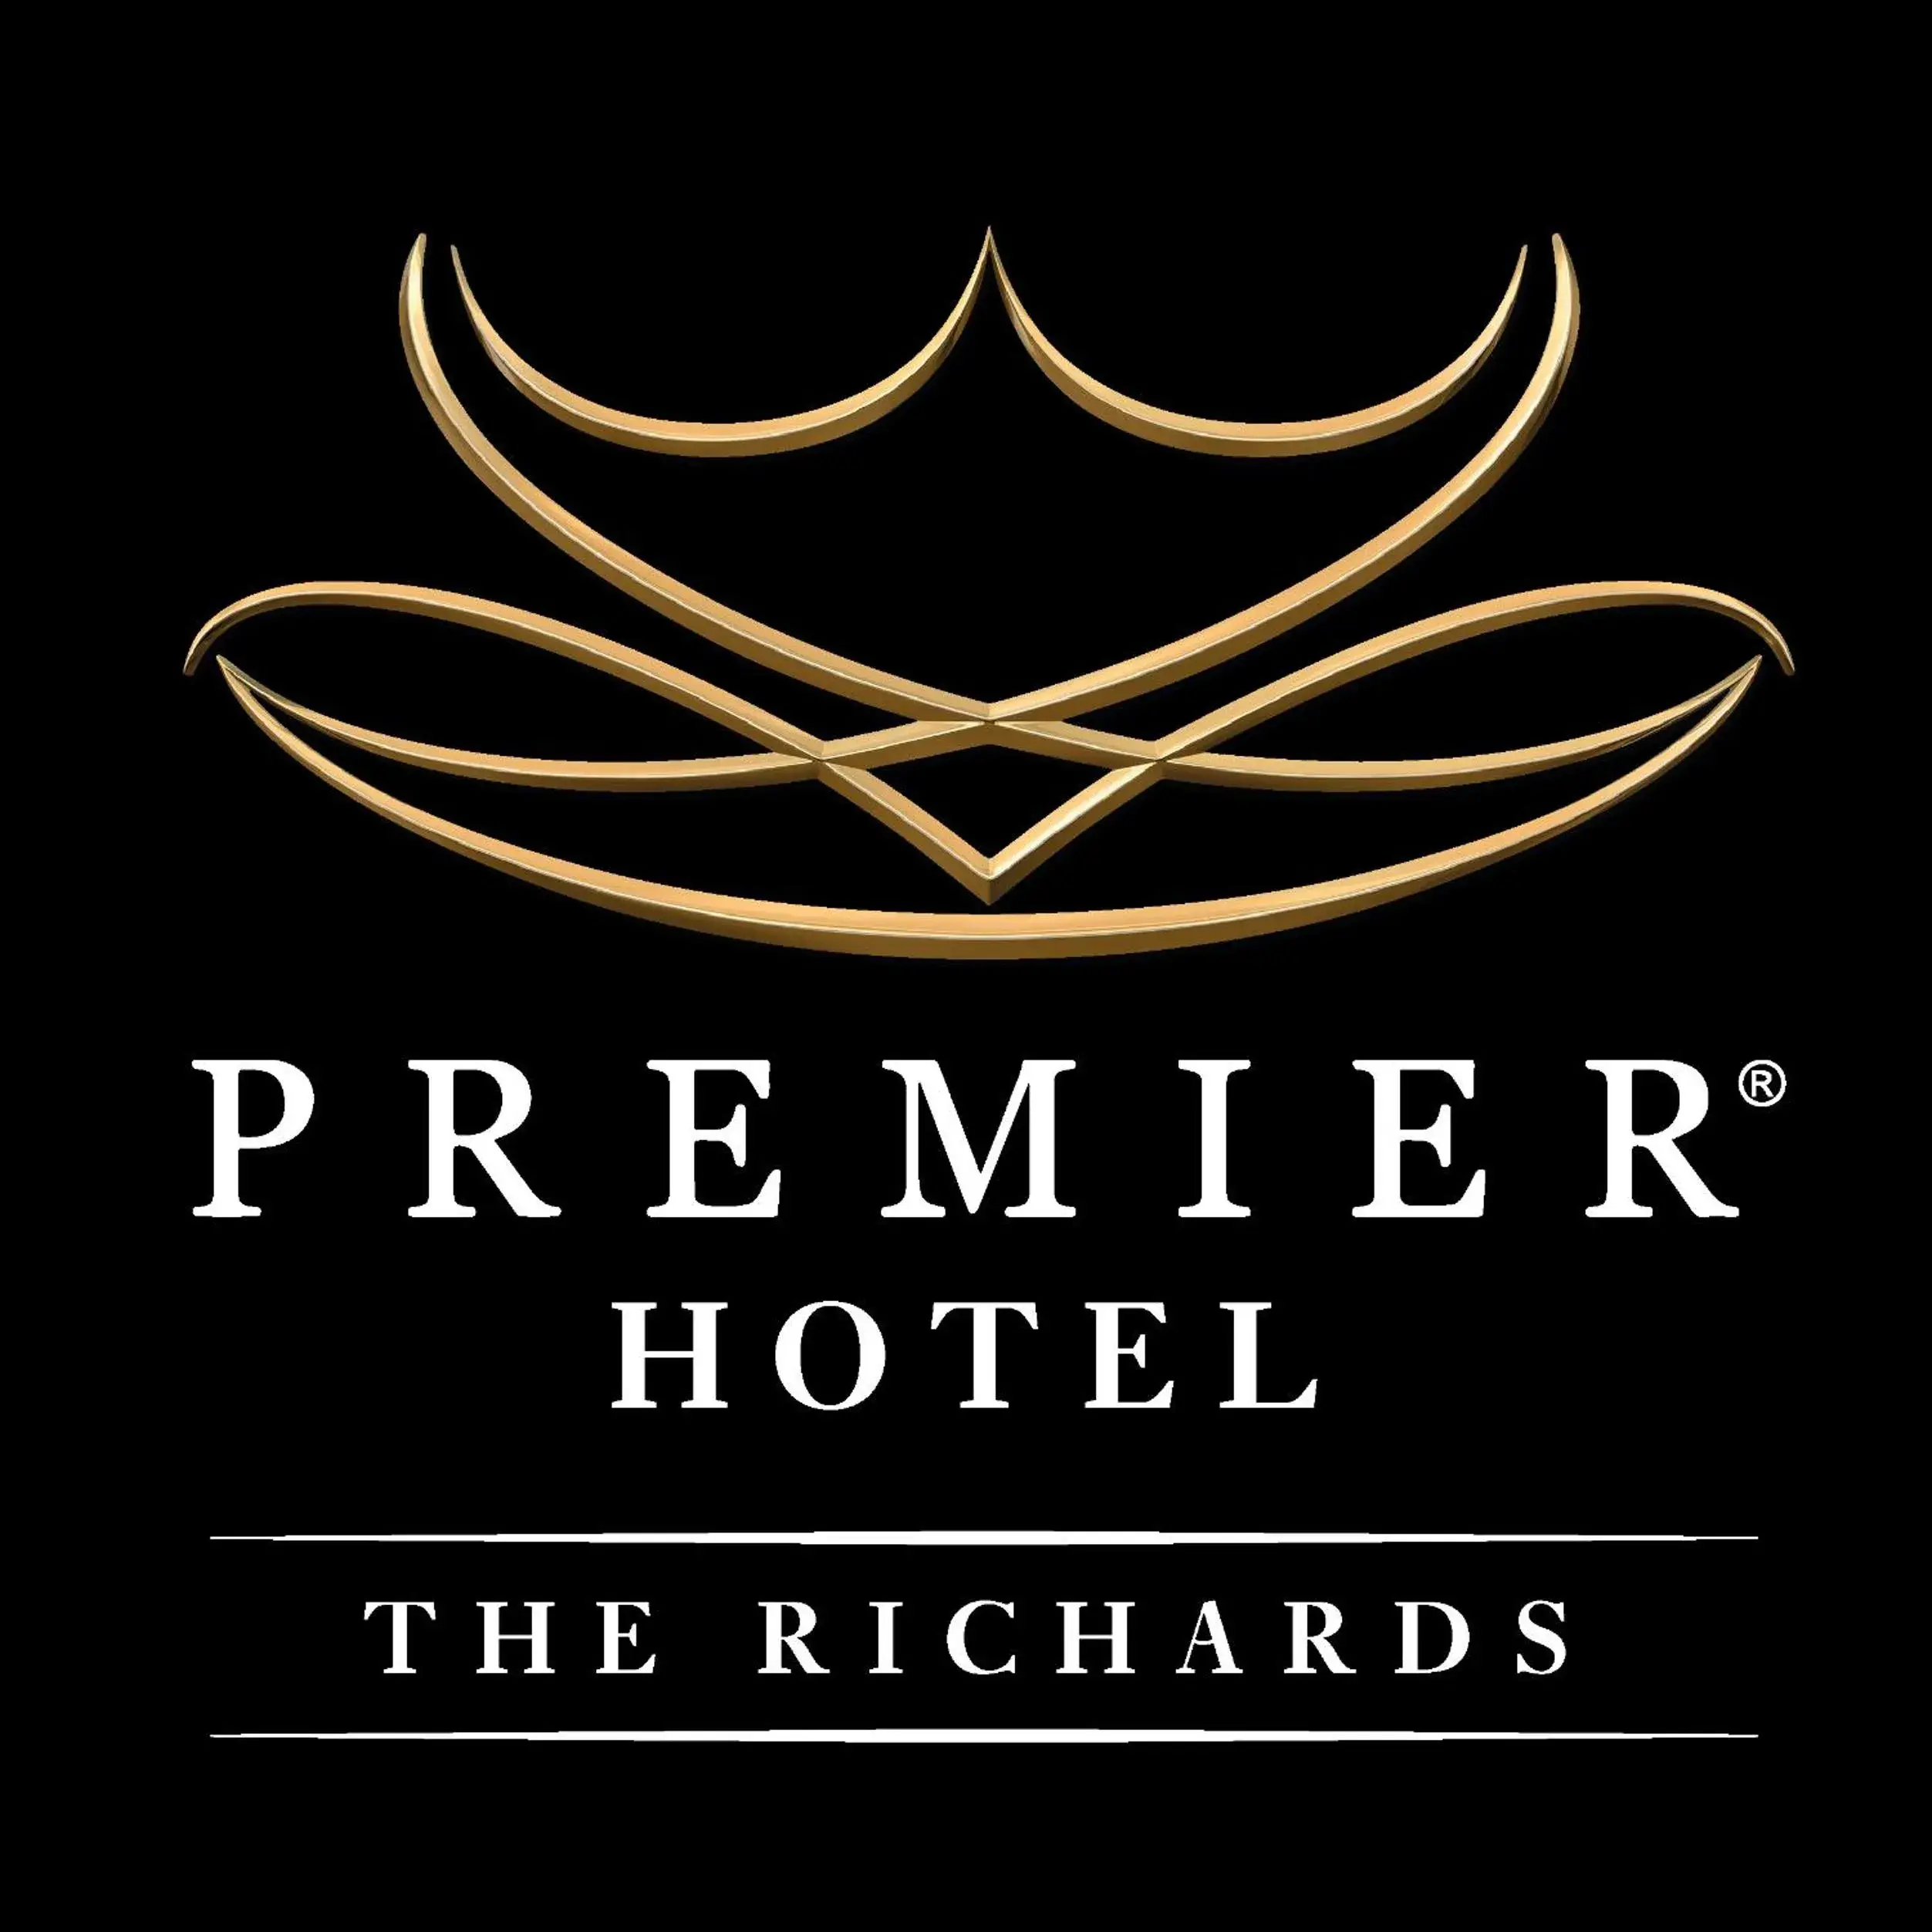 Property logo or sign in Premier Hotel The Richards